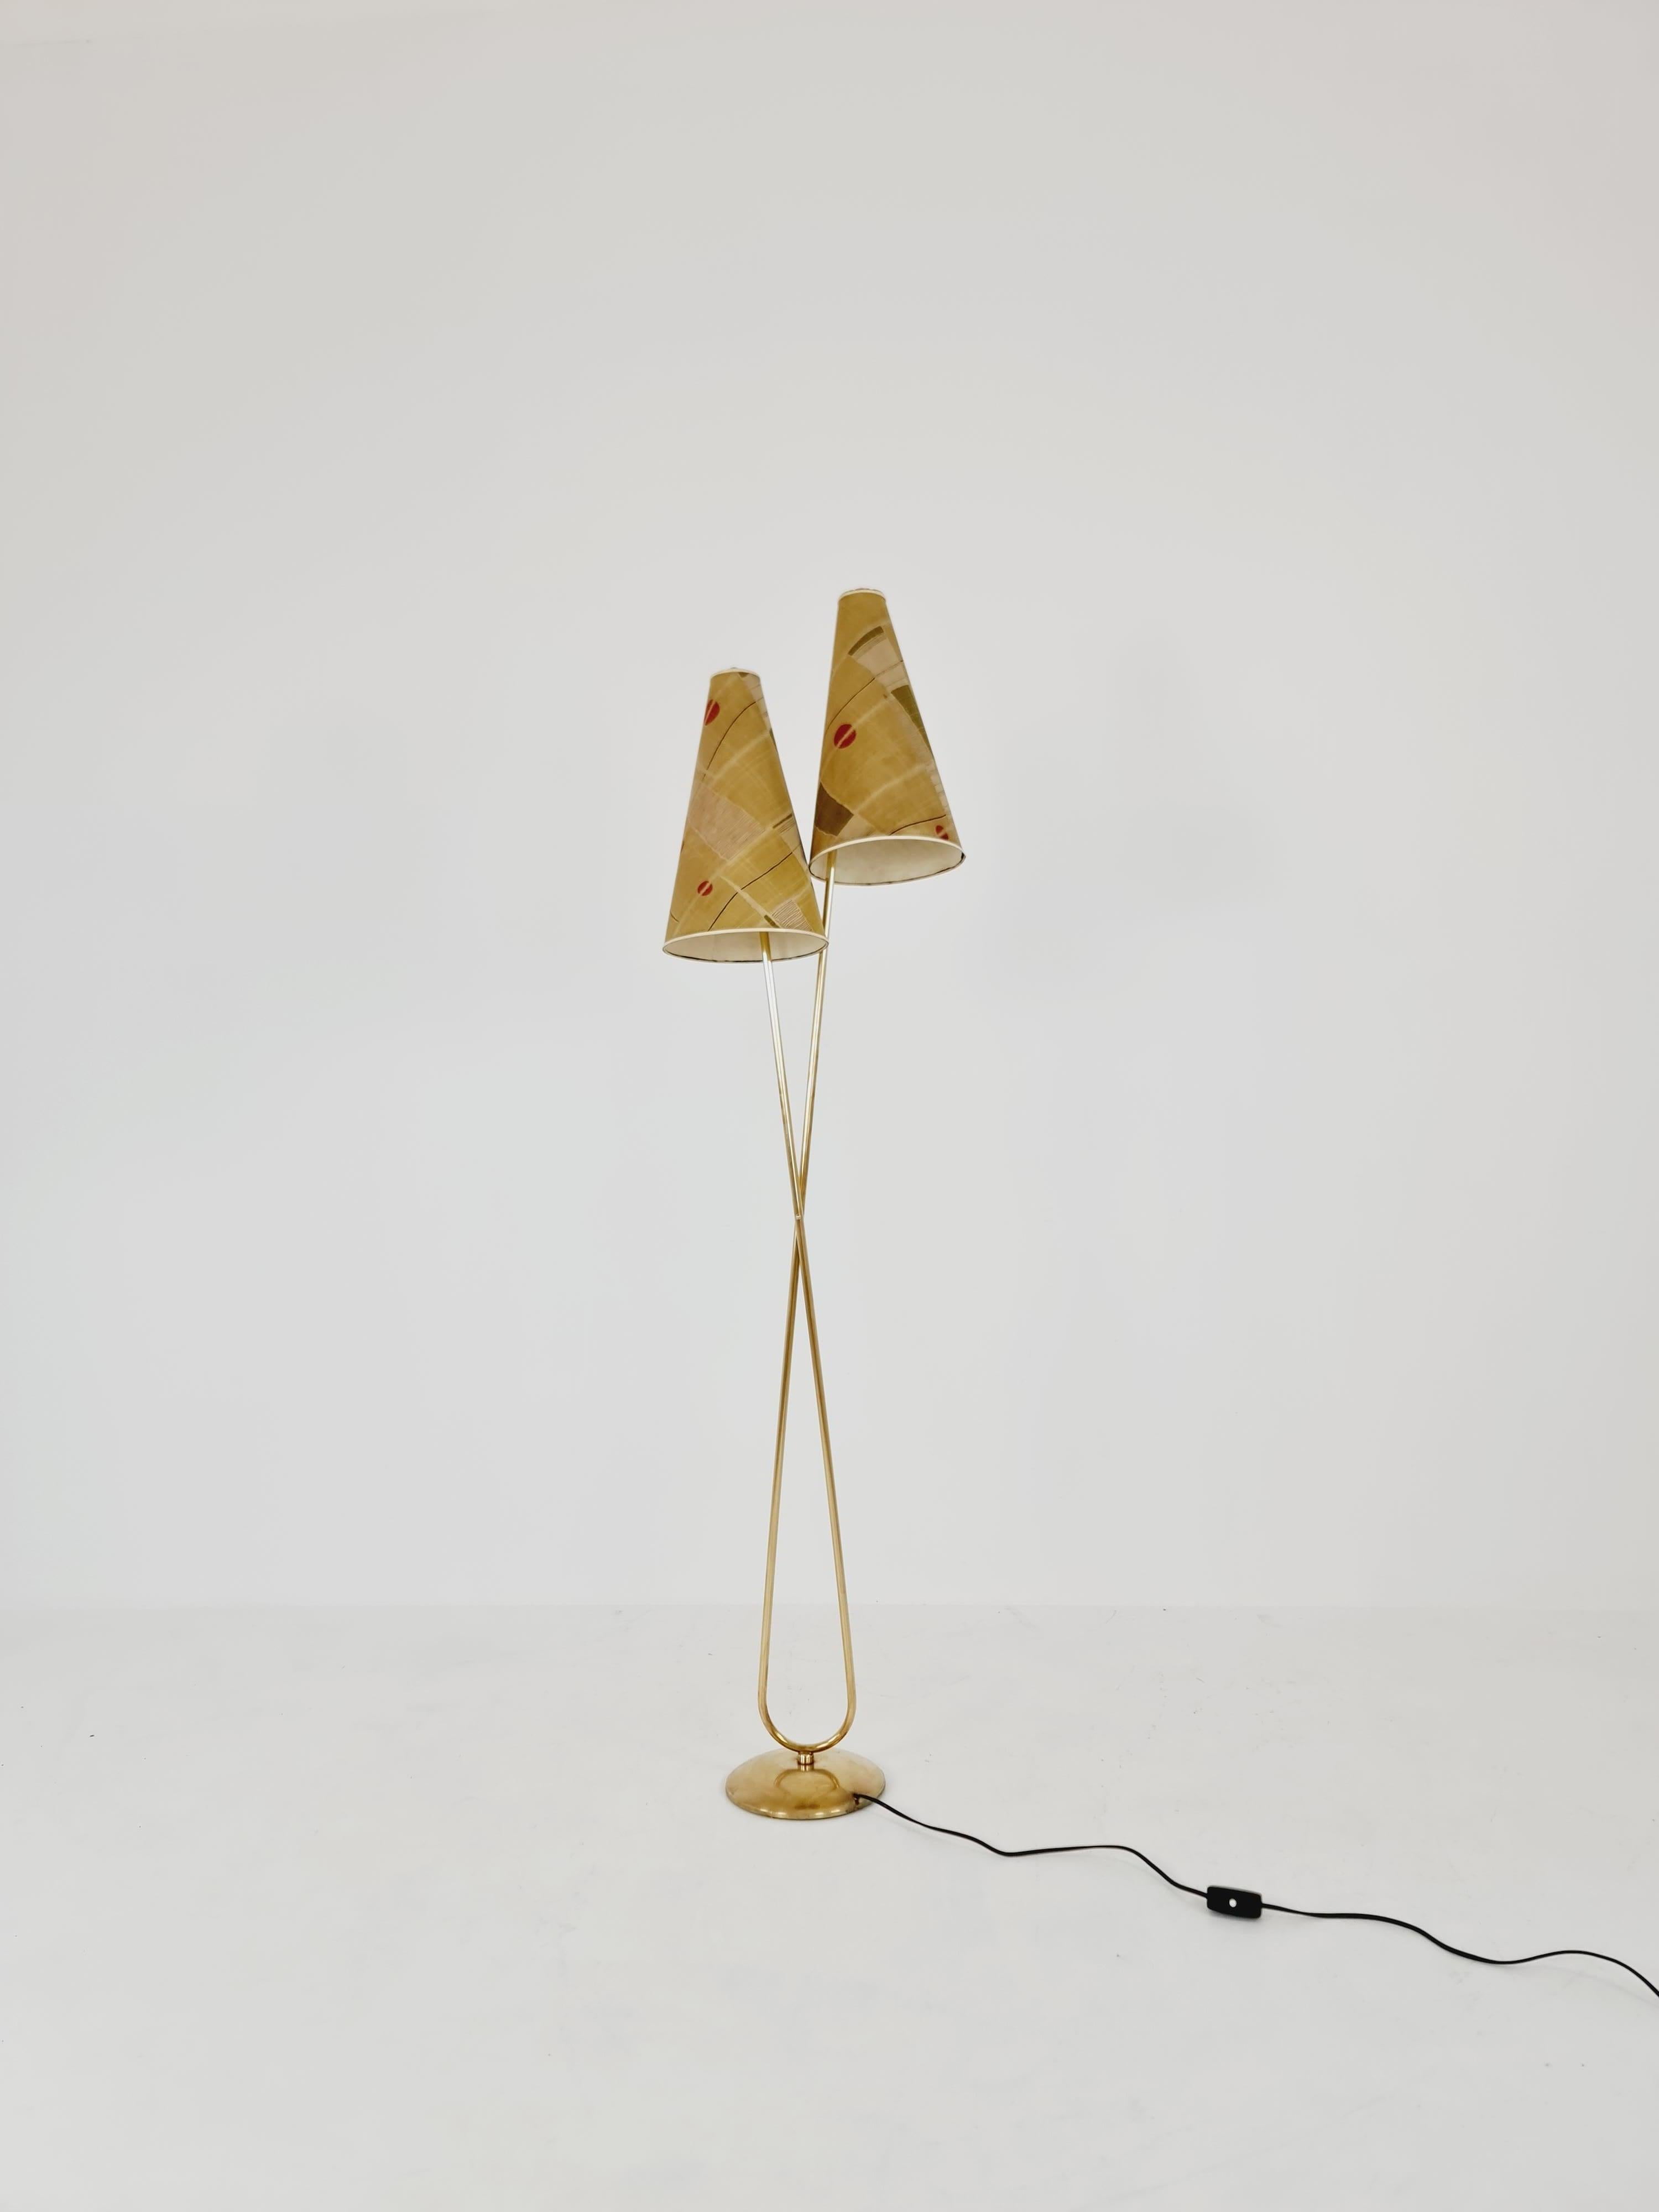 ORGIGINAL EXTREME RARE 1950s vintage floor lamp/ bag lamp mcm 

This lamp is extremly rare, one of its kind. The condition is perfect for its age. 

The brass is in a good condition as well. 

MADE IN GERMANY

Design year: 1950s

Dimensions: : 25 D